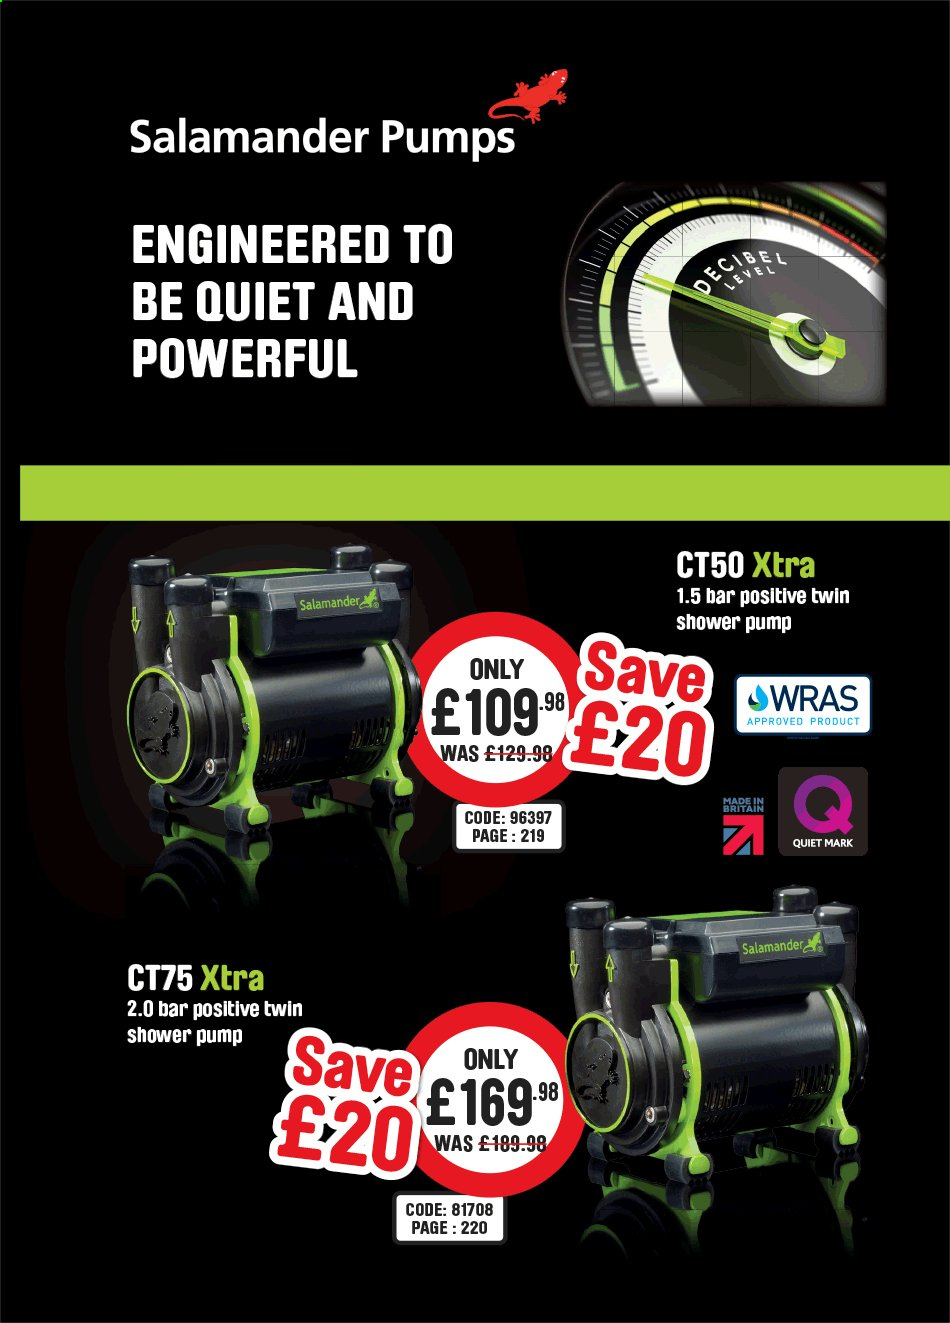 Toolstation offer . Page 203.